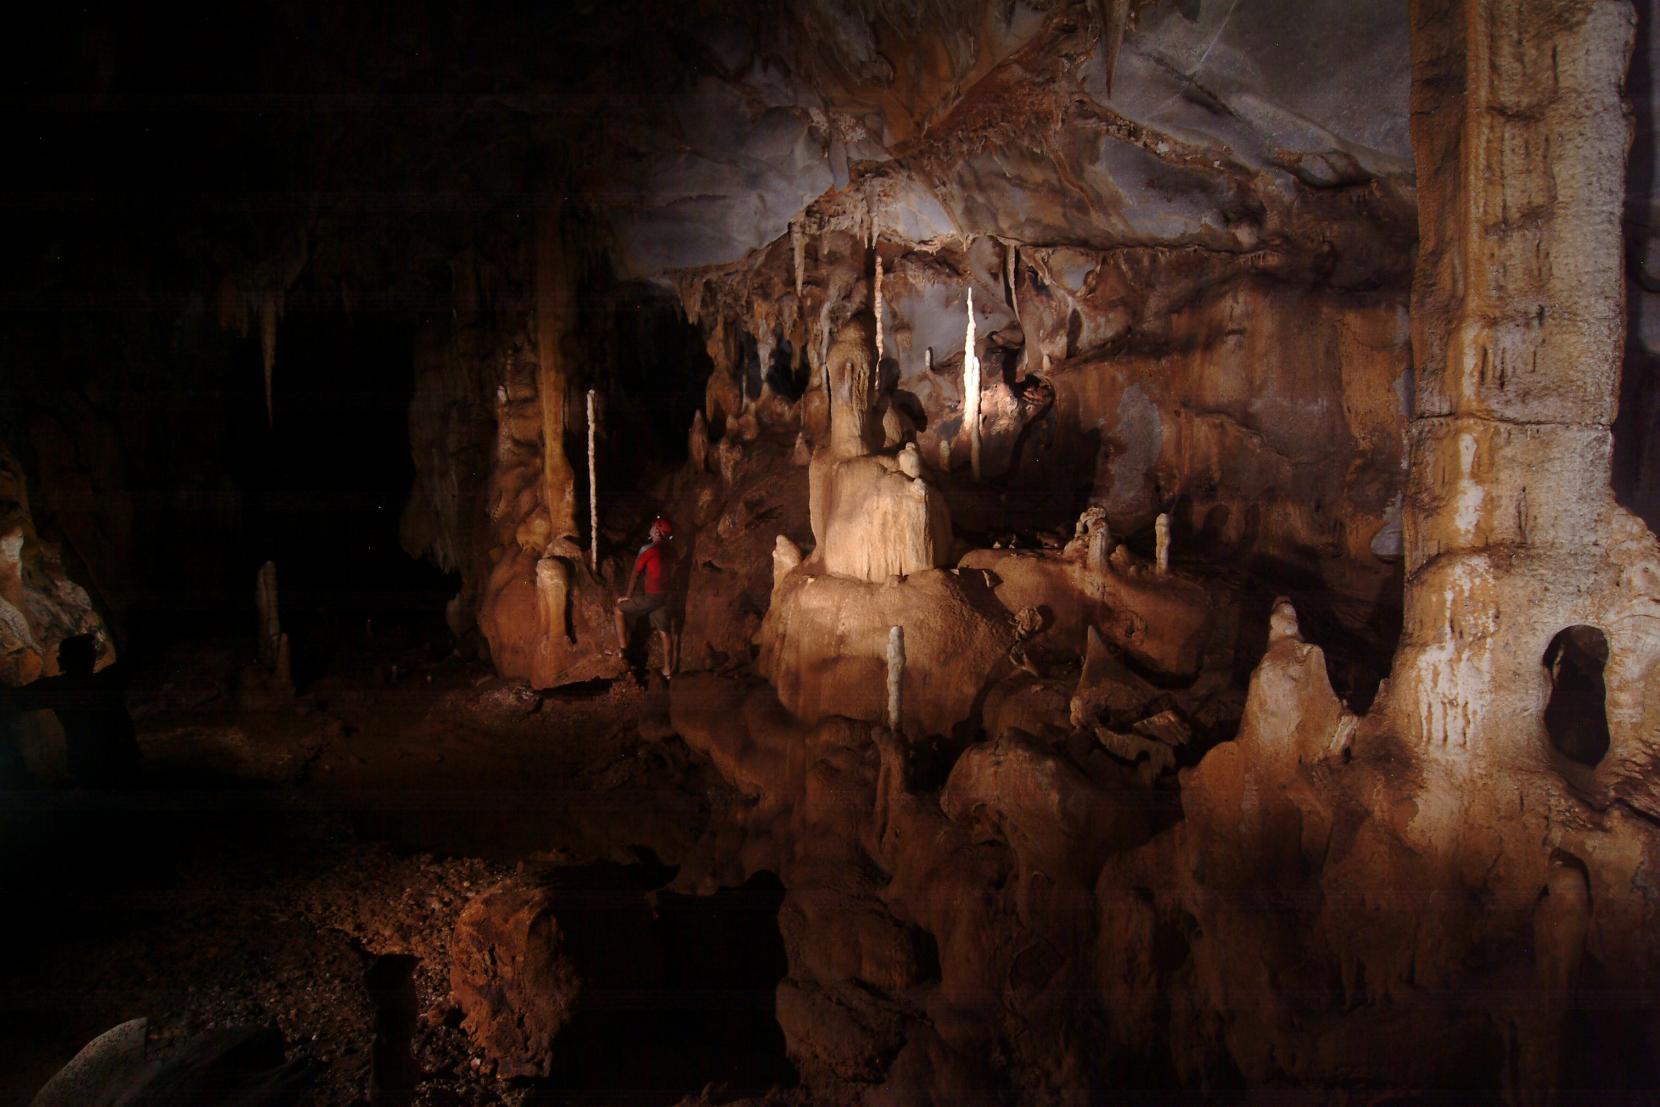 The cave room in Puerto Princesa Subterranean River National Park in Palawan, Philippines. A stalagmite collected from this location served as a record for ancient rainfall data. Photo by Raf Rios